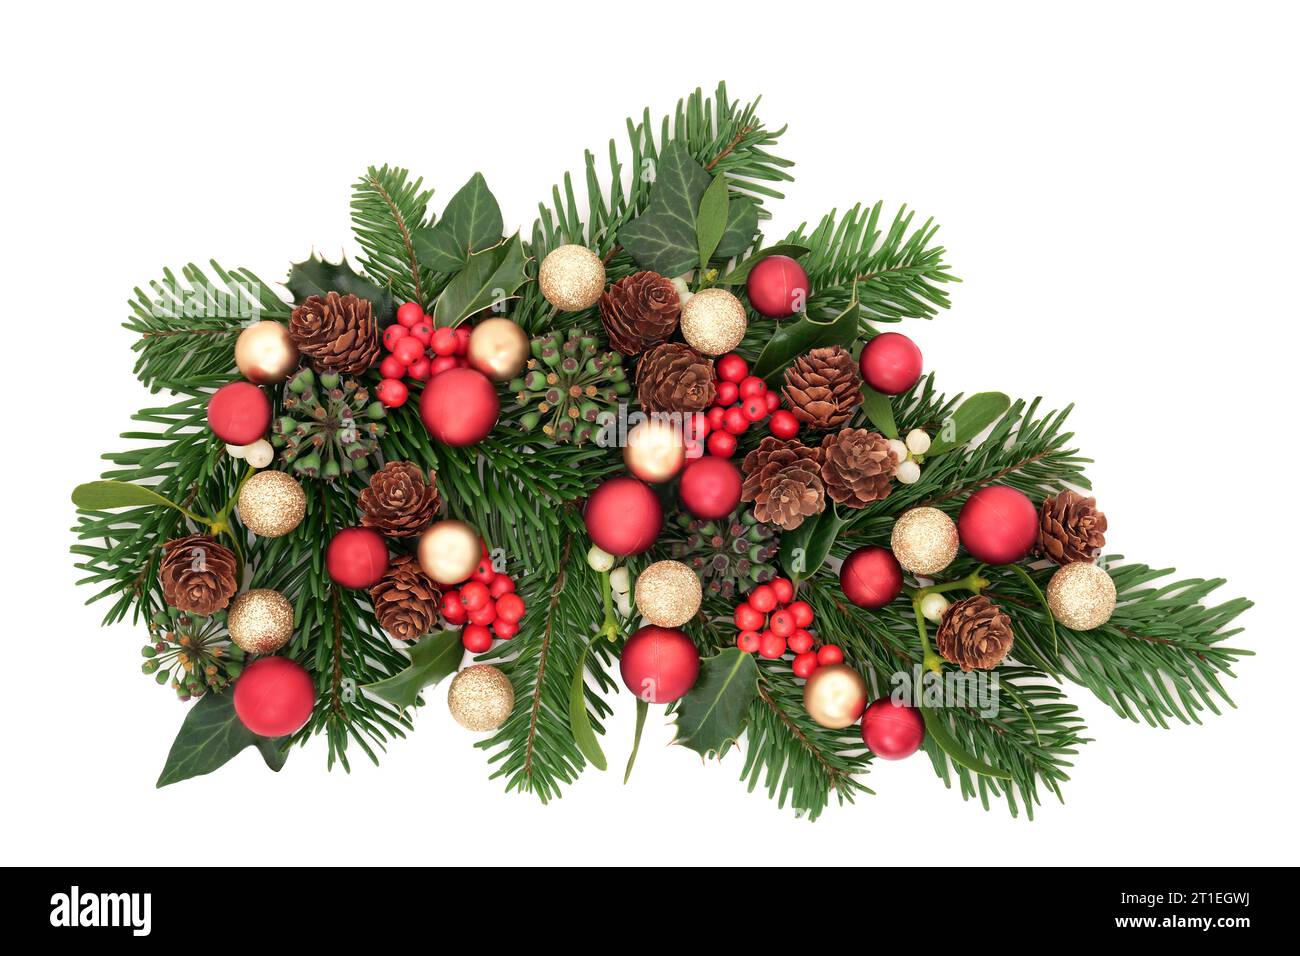 Holly and Pine Boughs With Red Berries Christmas Decor Large Pine